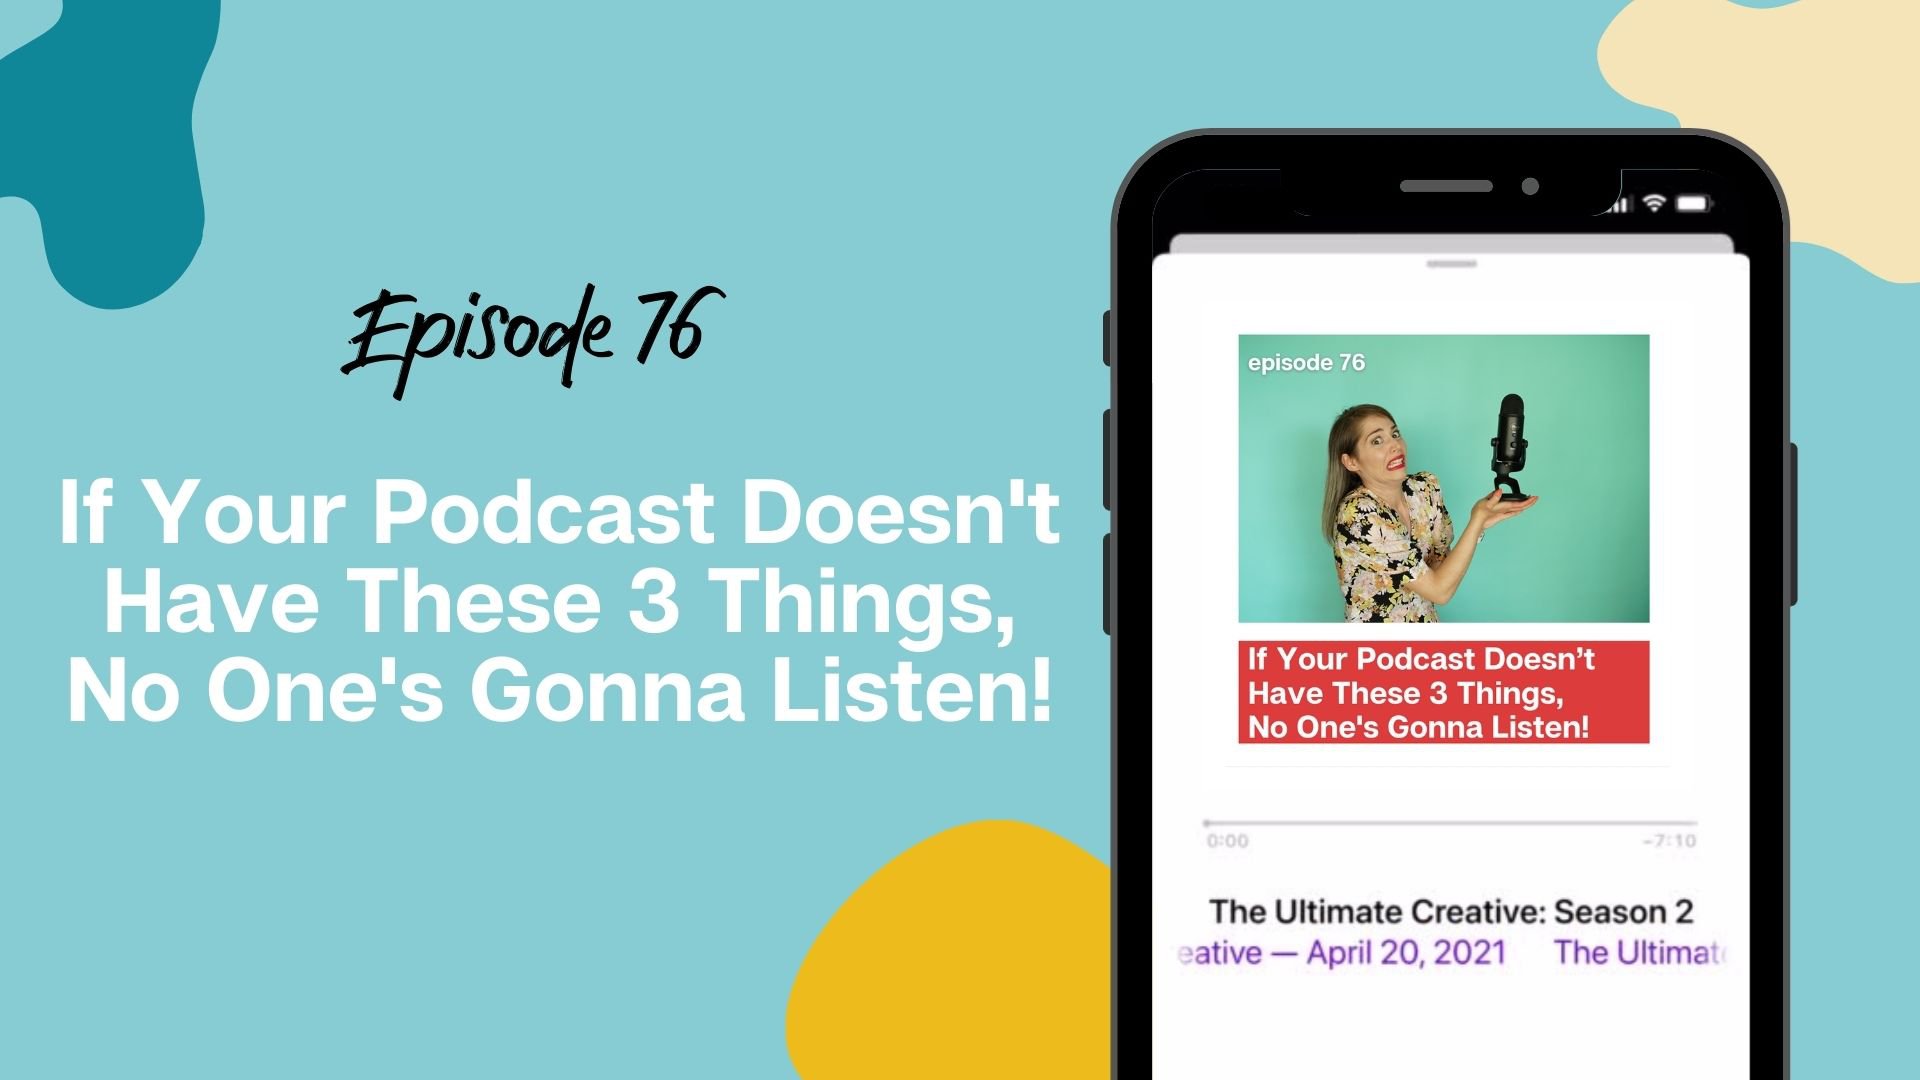 If Your Podcast Doesn’t Have These 3 Things, No One's Gonna Listen!